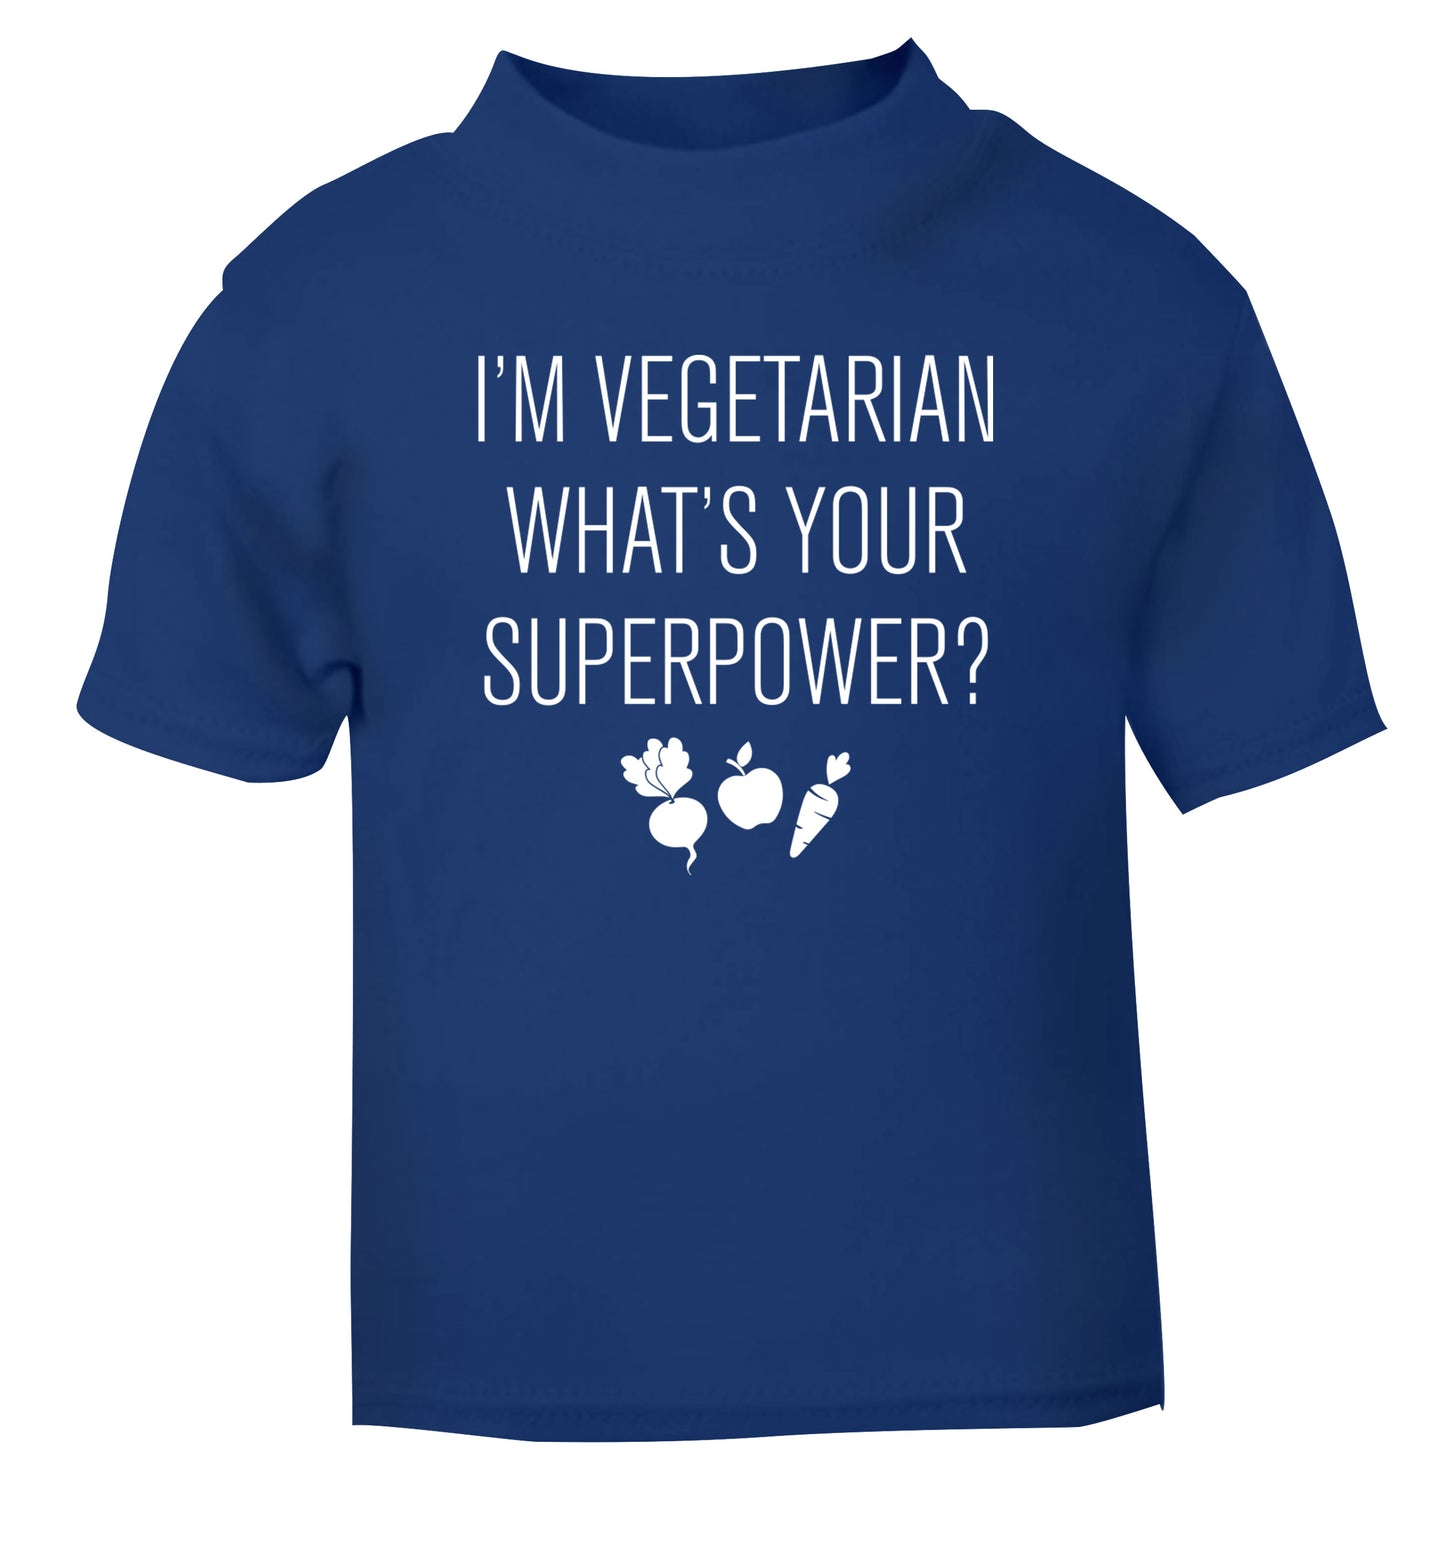 I'm vegetarian what's your superpower? blue Baby Toddler Tshirt 2 Years